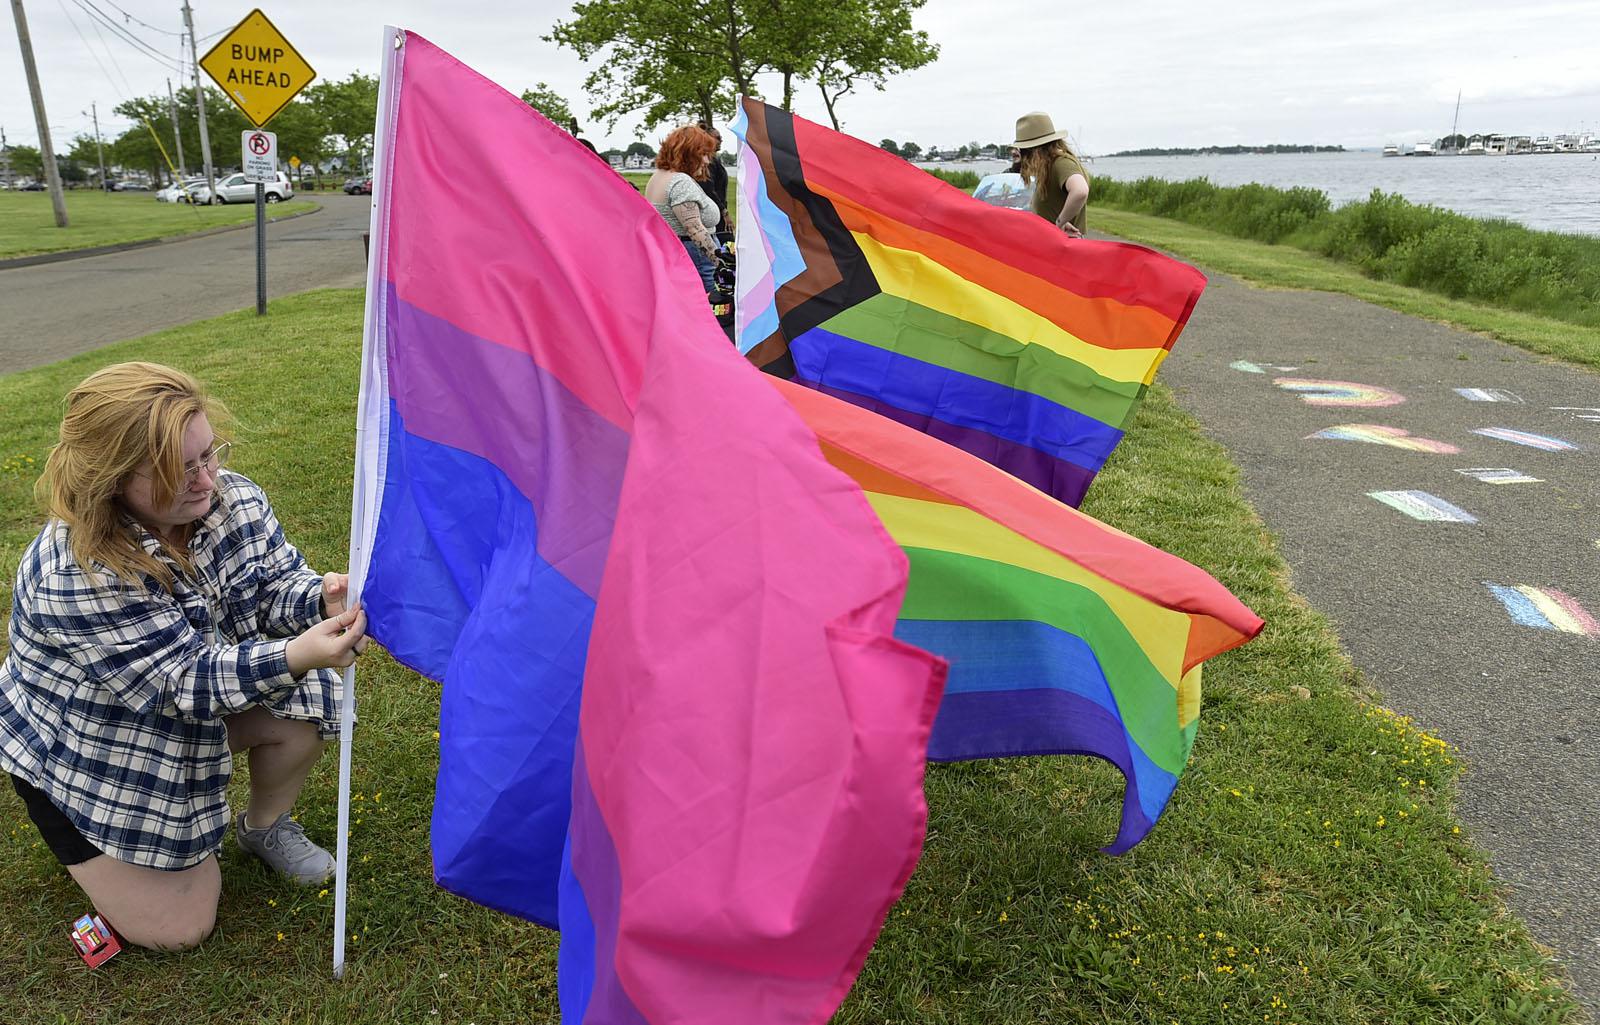 Ct Set To Celebrate The Lgbtq Community With These Pride Events